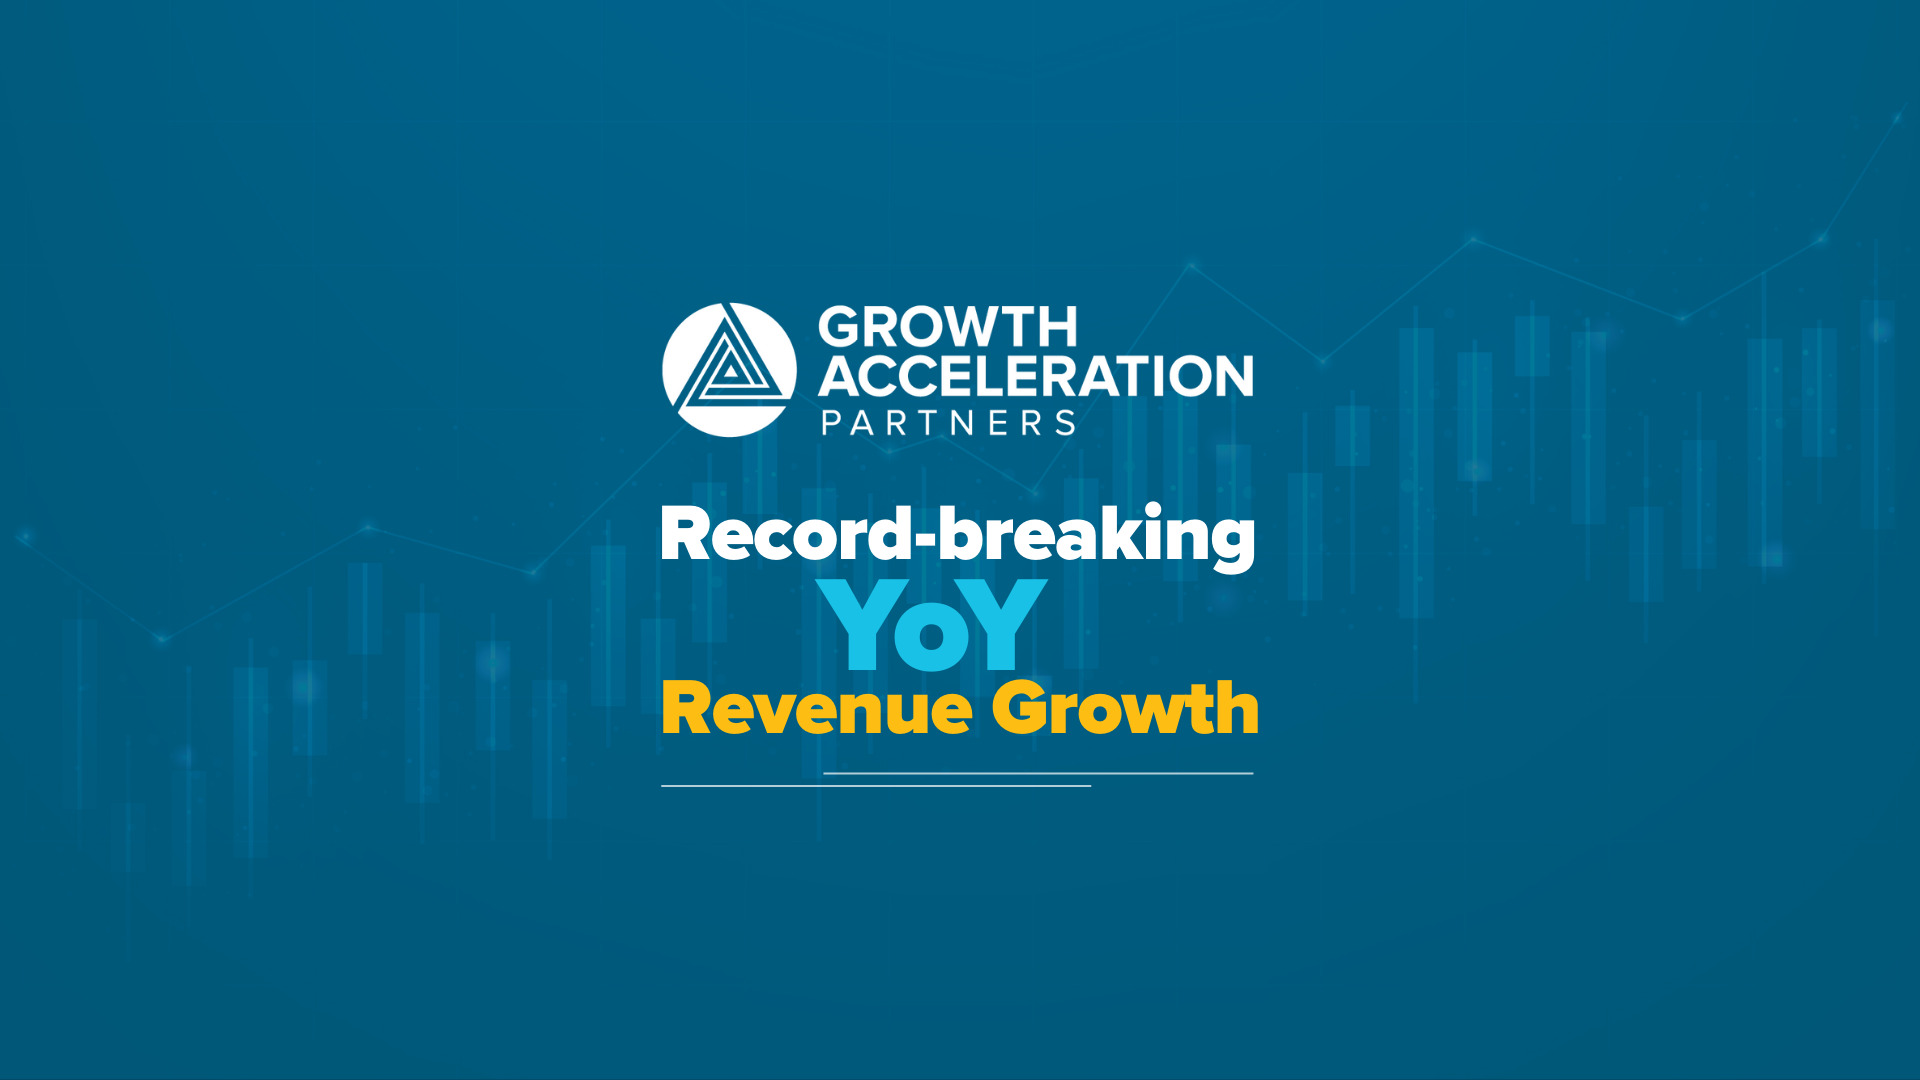 Growth Acceleration Partners Sees Record-breaking YoY Revenue Growth in 2021